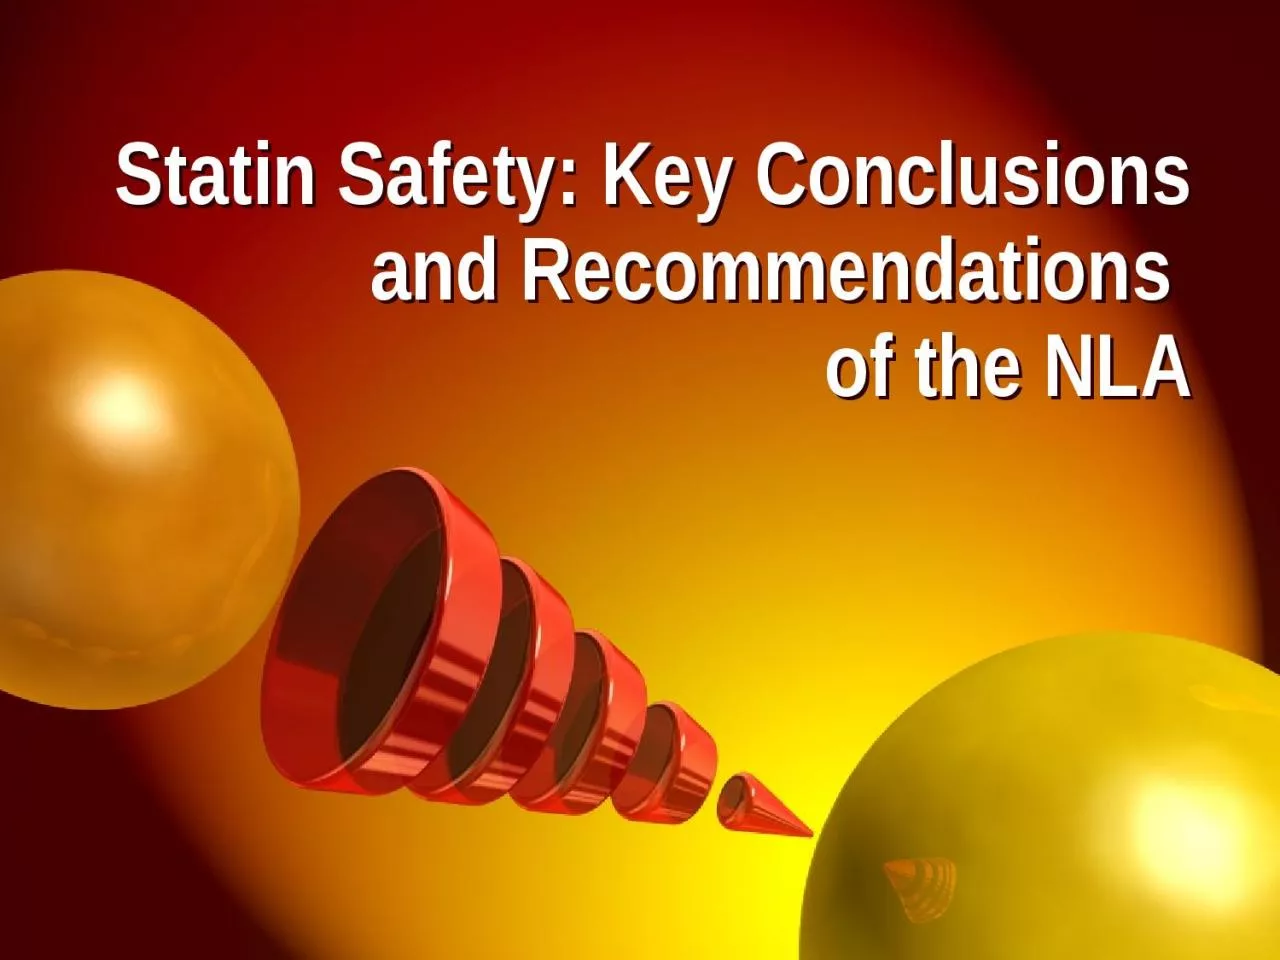 Statin Safety: Key Conclusions and Recommendations